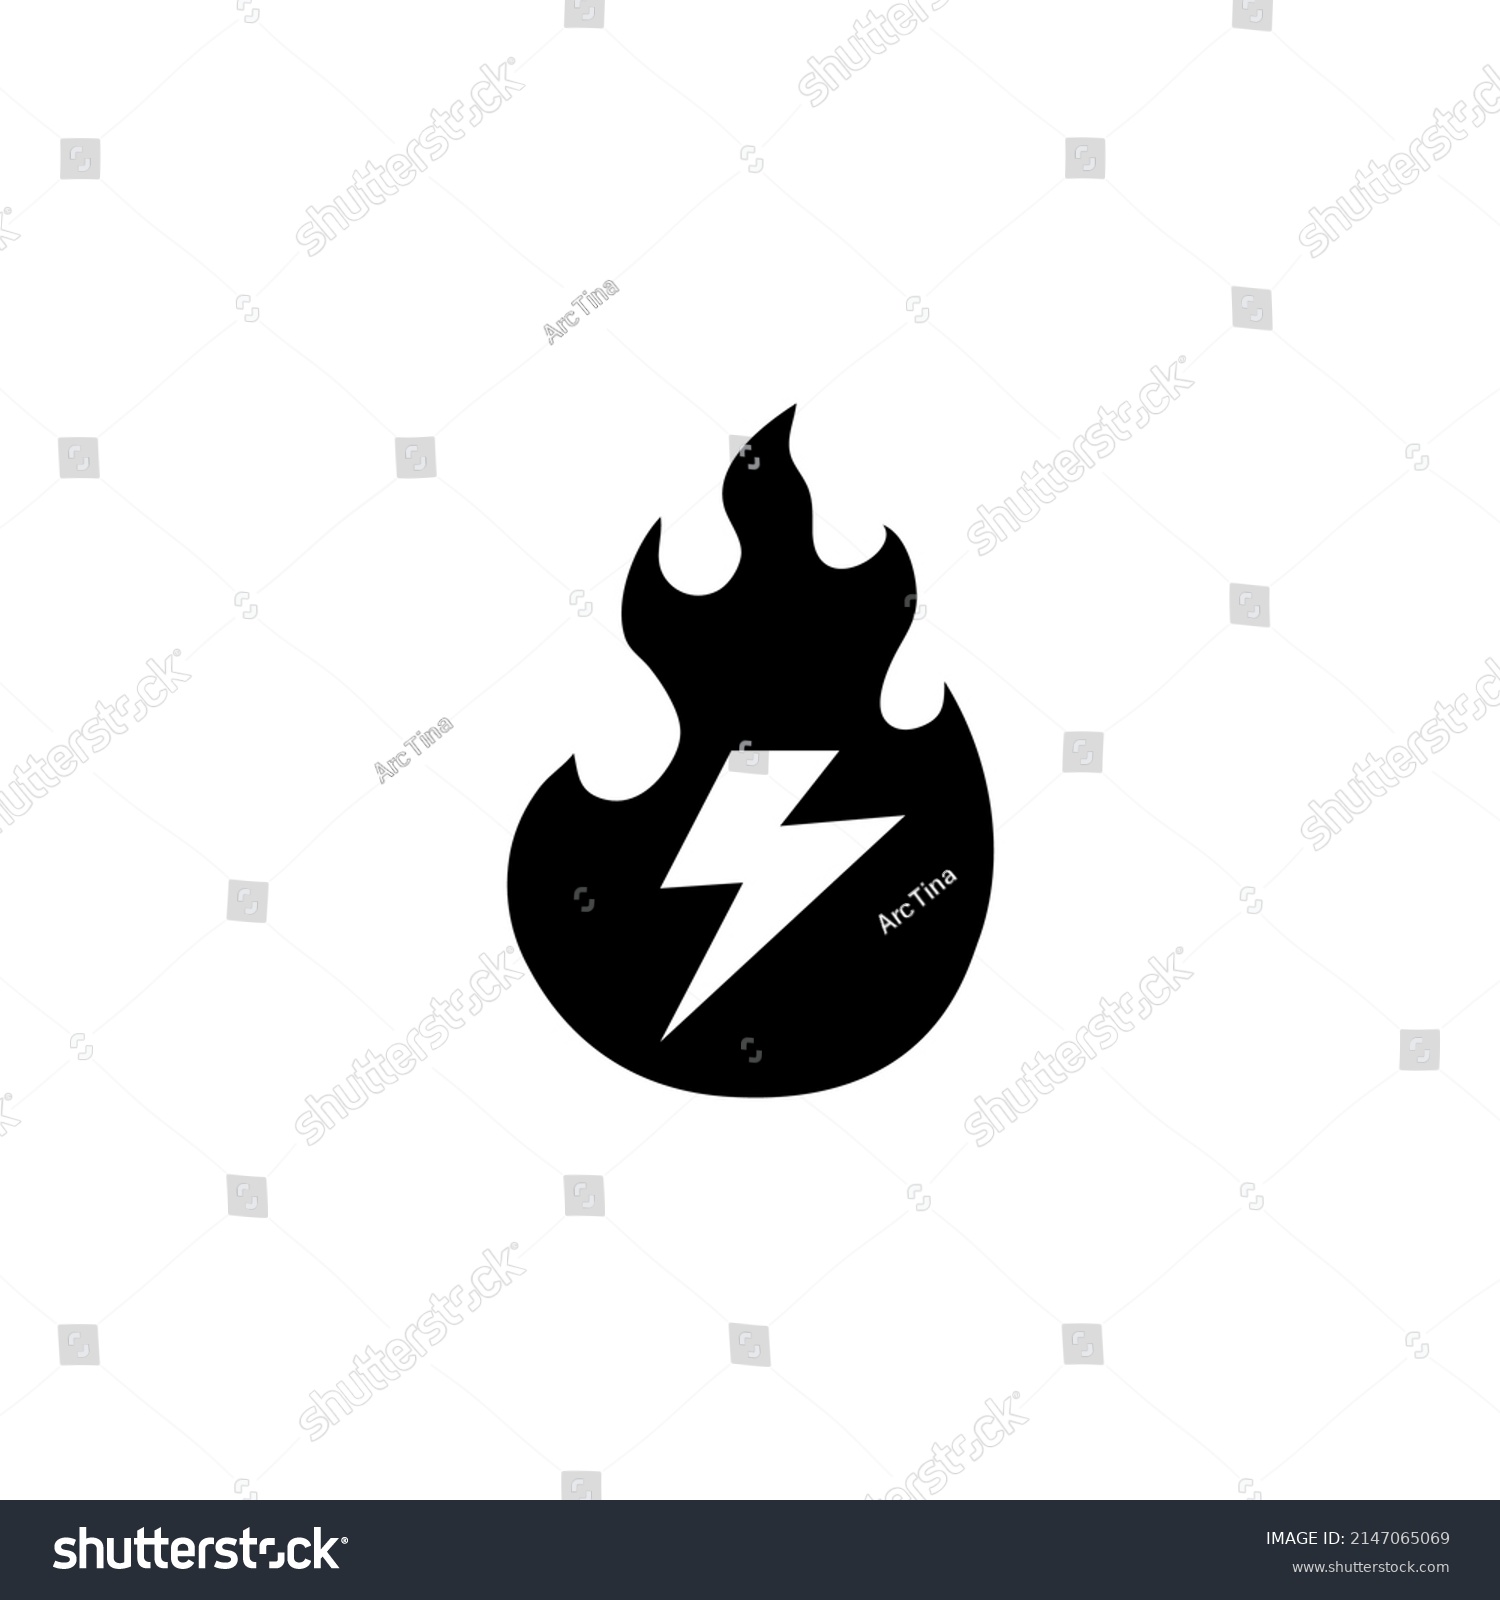 SVG of Energy Fat Burn, Kcal Fire, Kilocalorie Hot Flame. Flat Vector Icon illustration. Simple black symbol on white background. Energy Fat Burn Kcal Fire sign design template for web and mobile UI element. svg